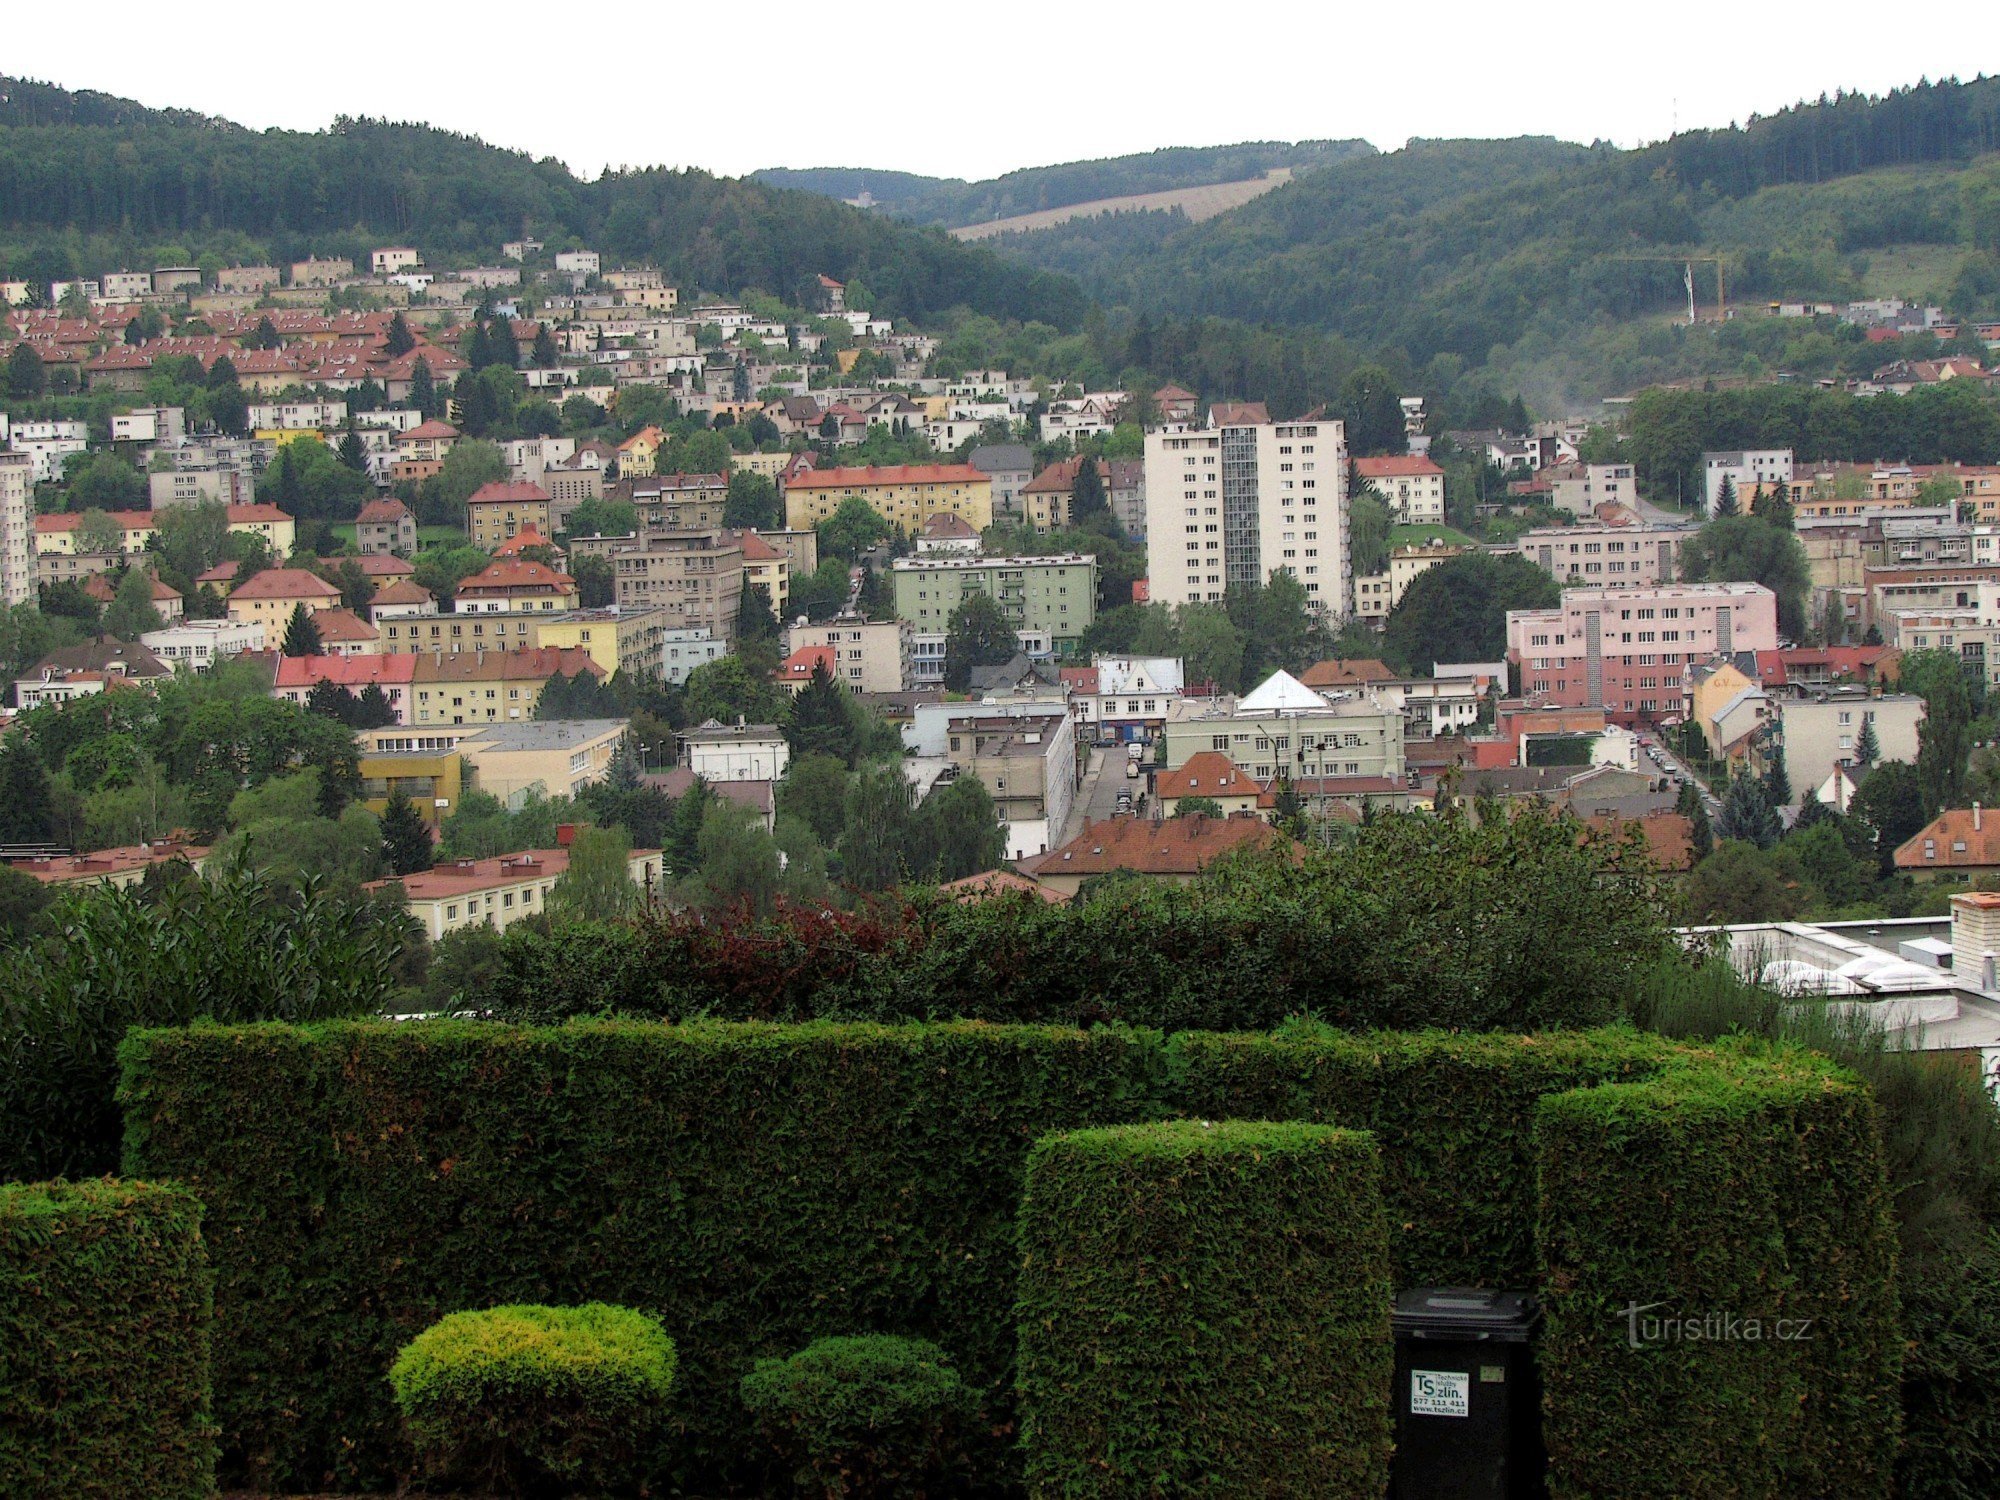 From South Slopes to Drevnice and to the center of Zlín